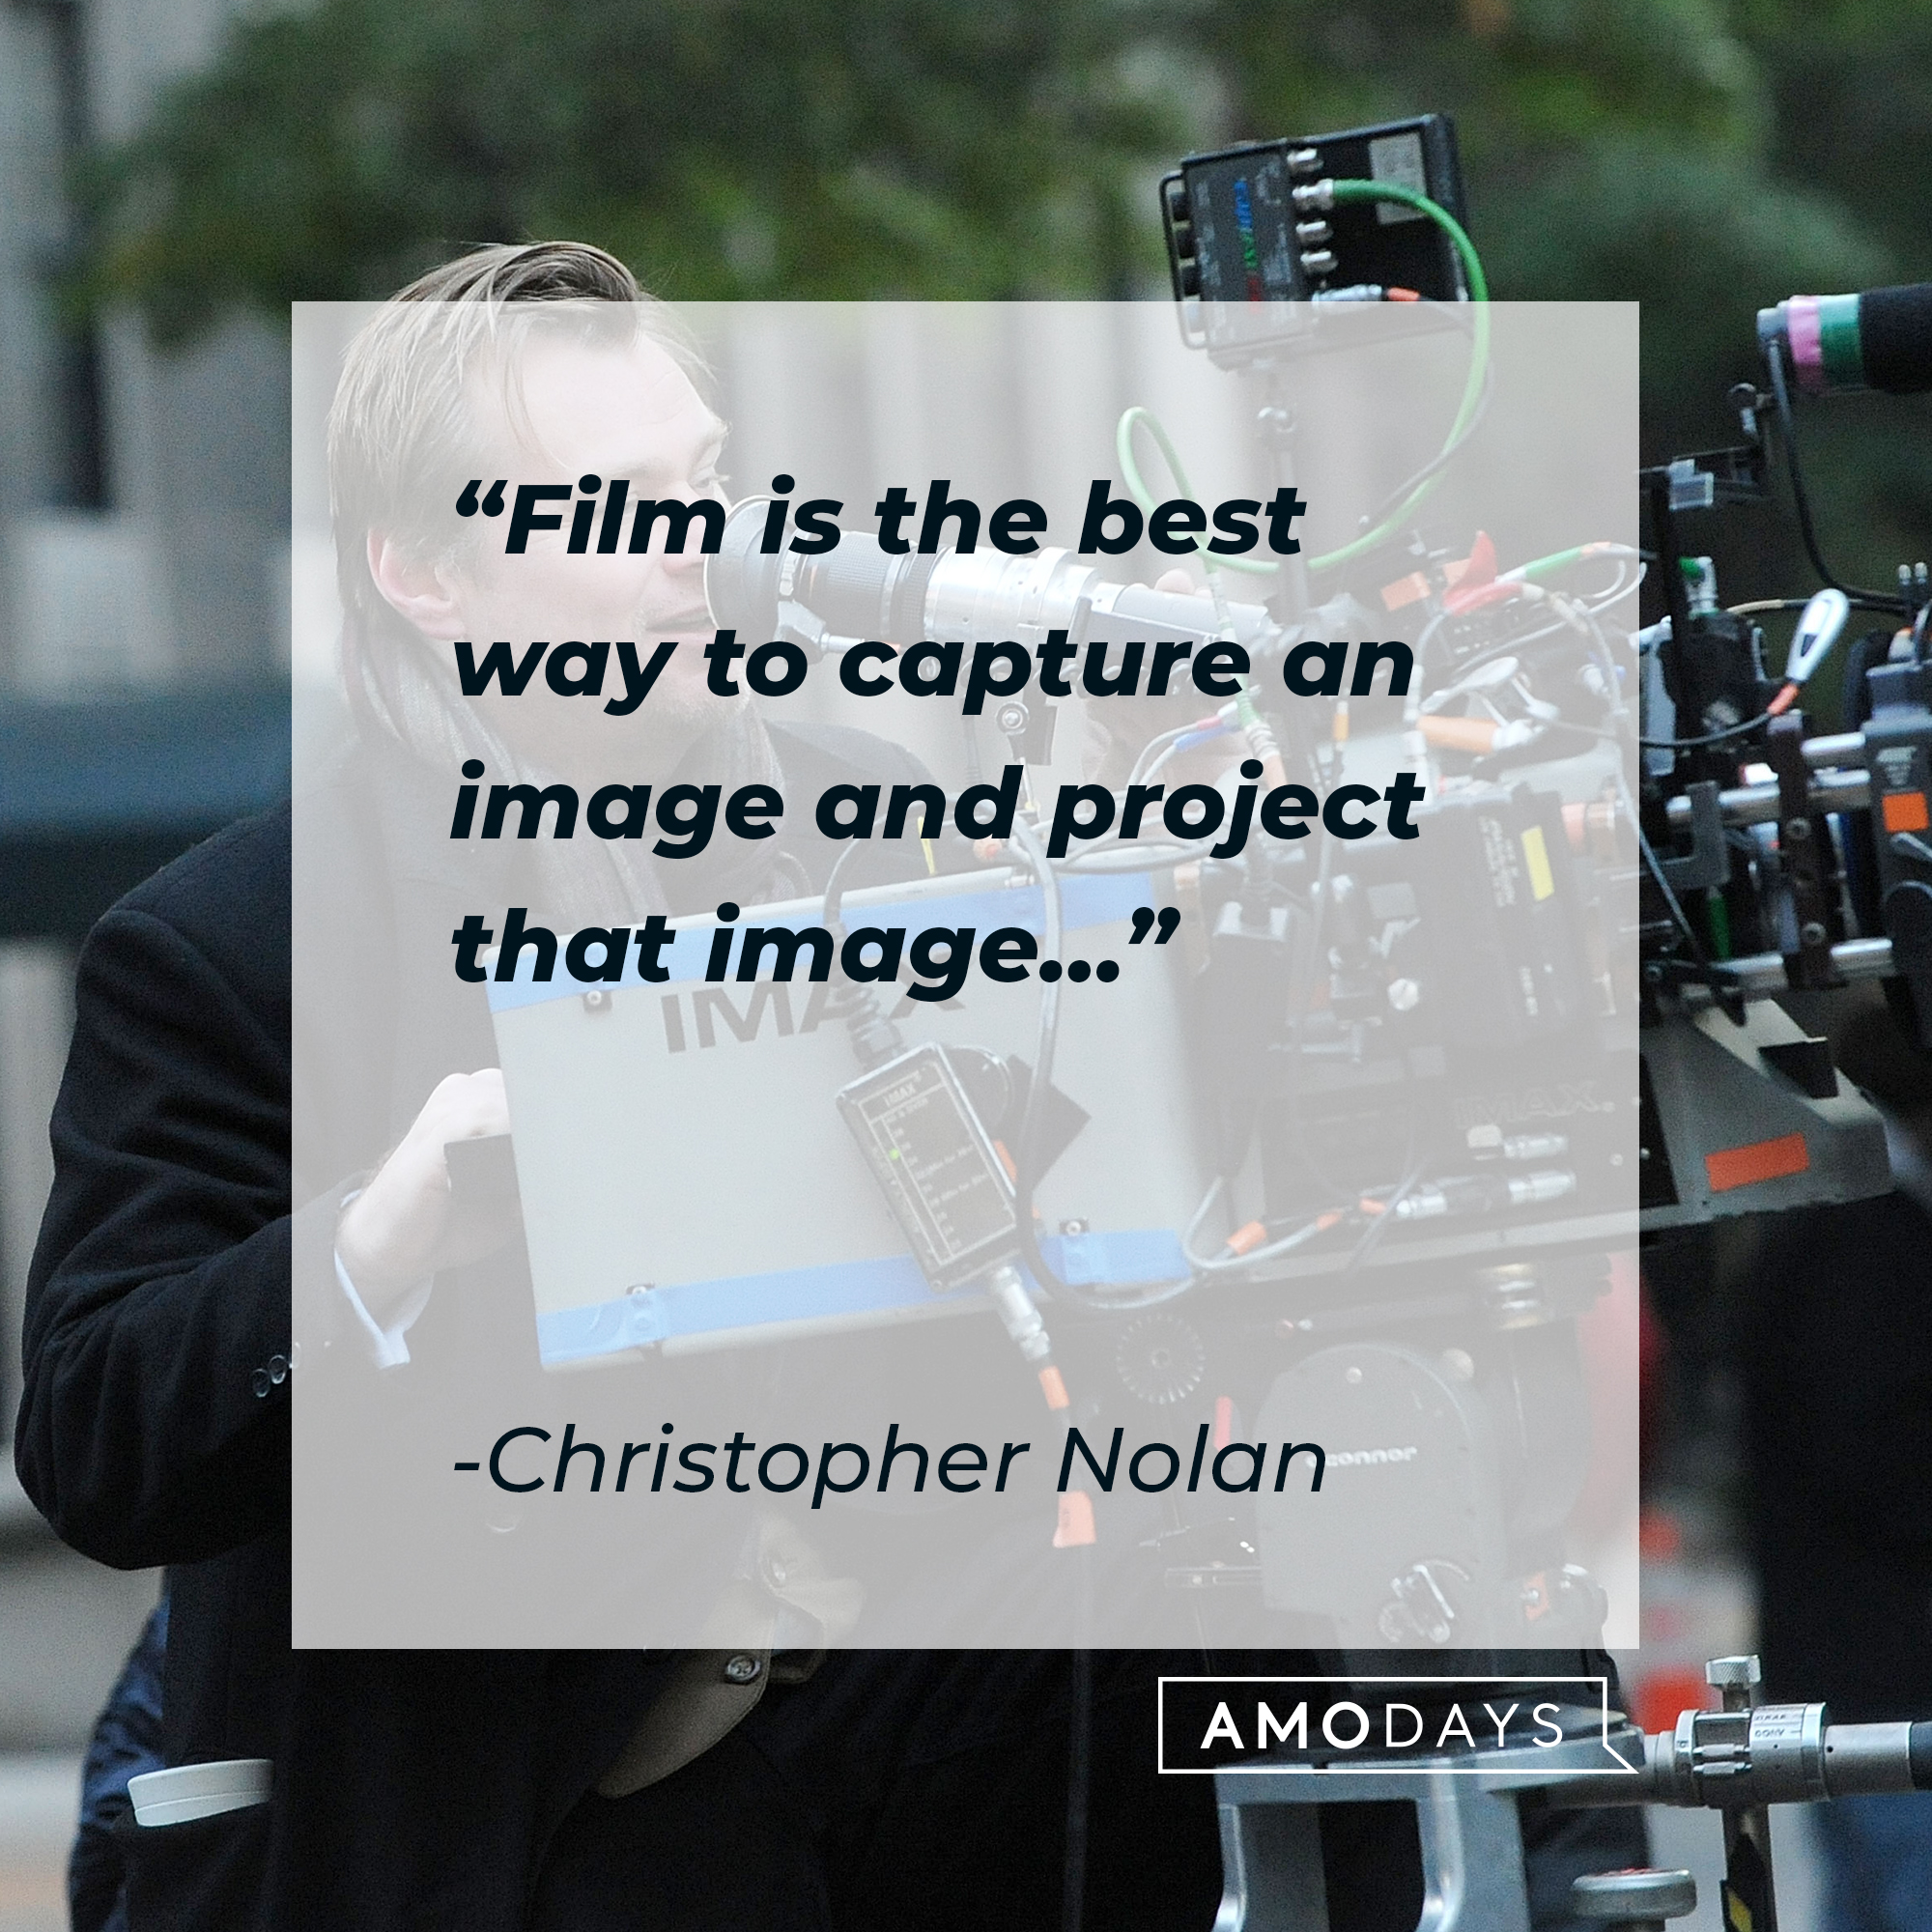 Christopher Nolan, with his quote: “Film is the best way to capture an image and project that image…”   | Source: Getty Images